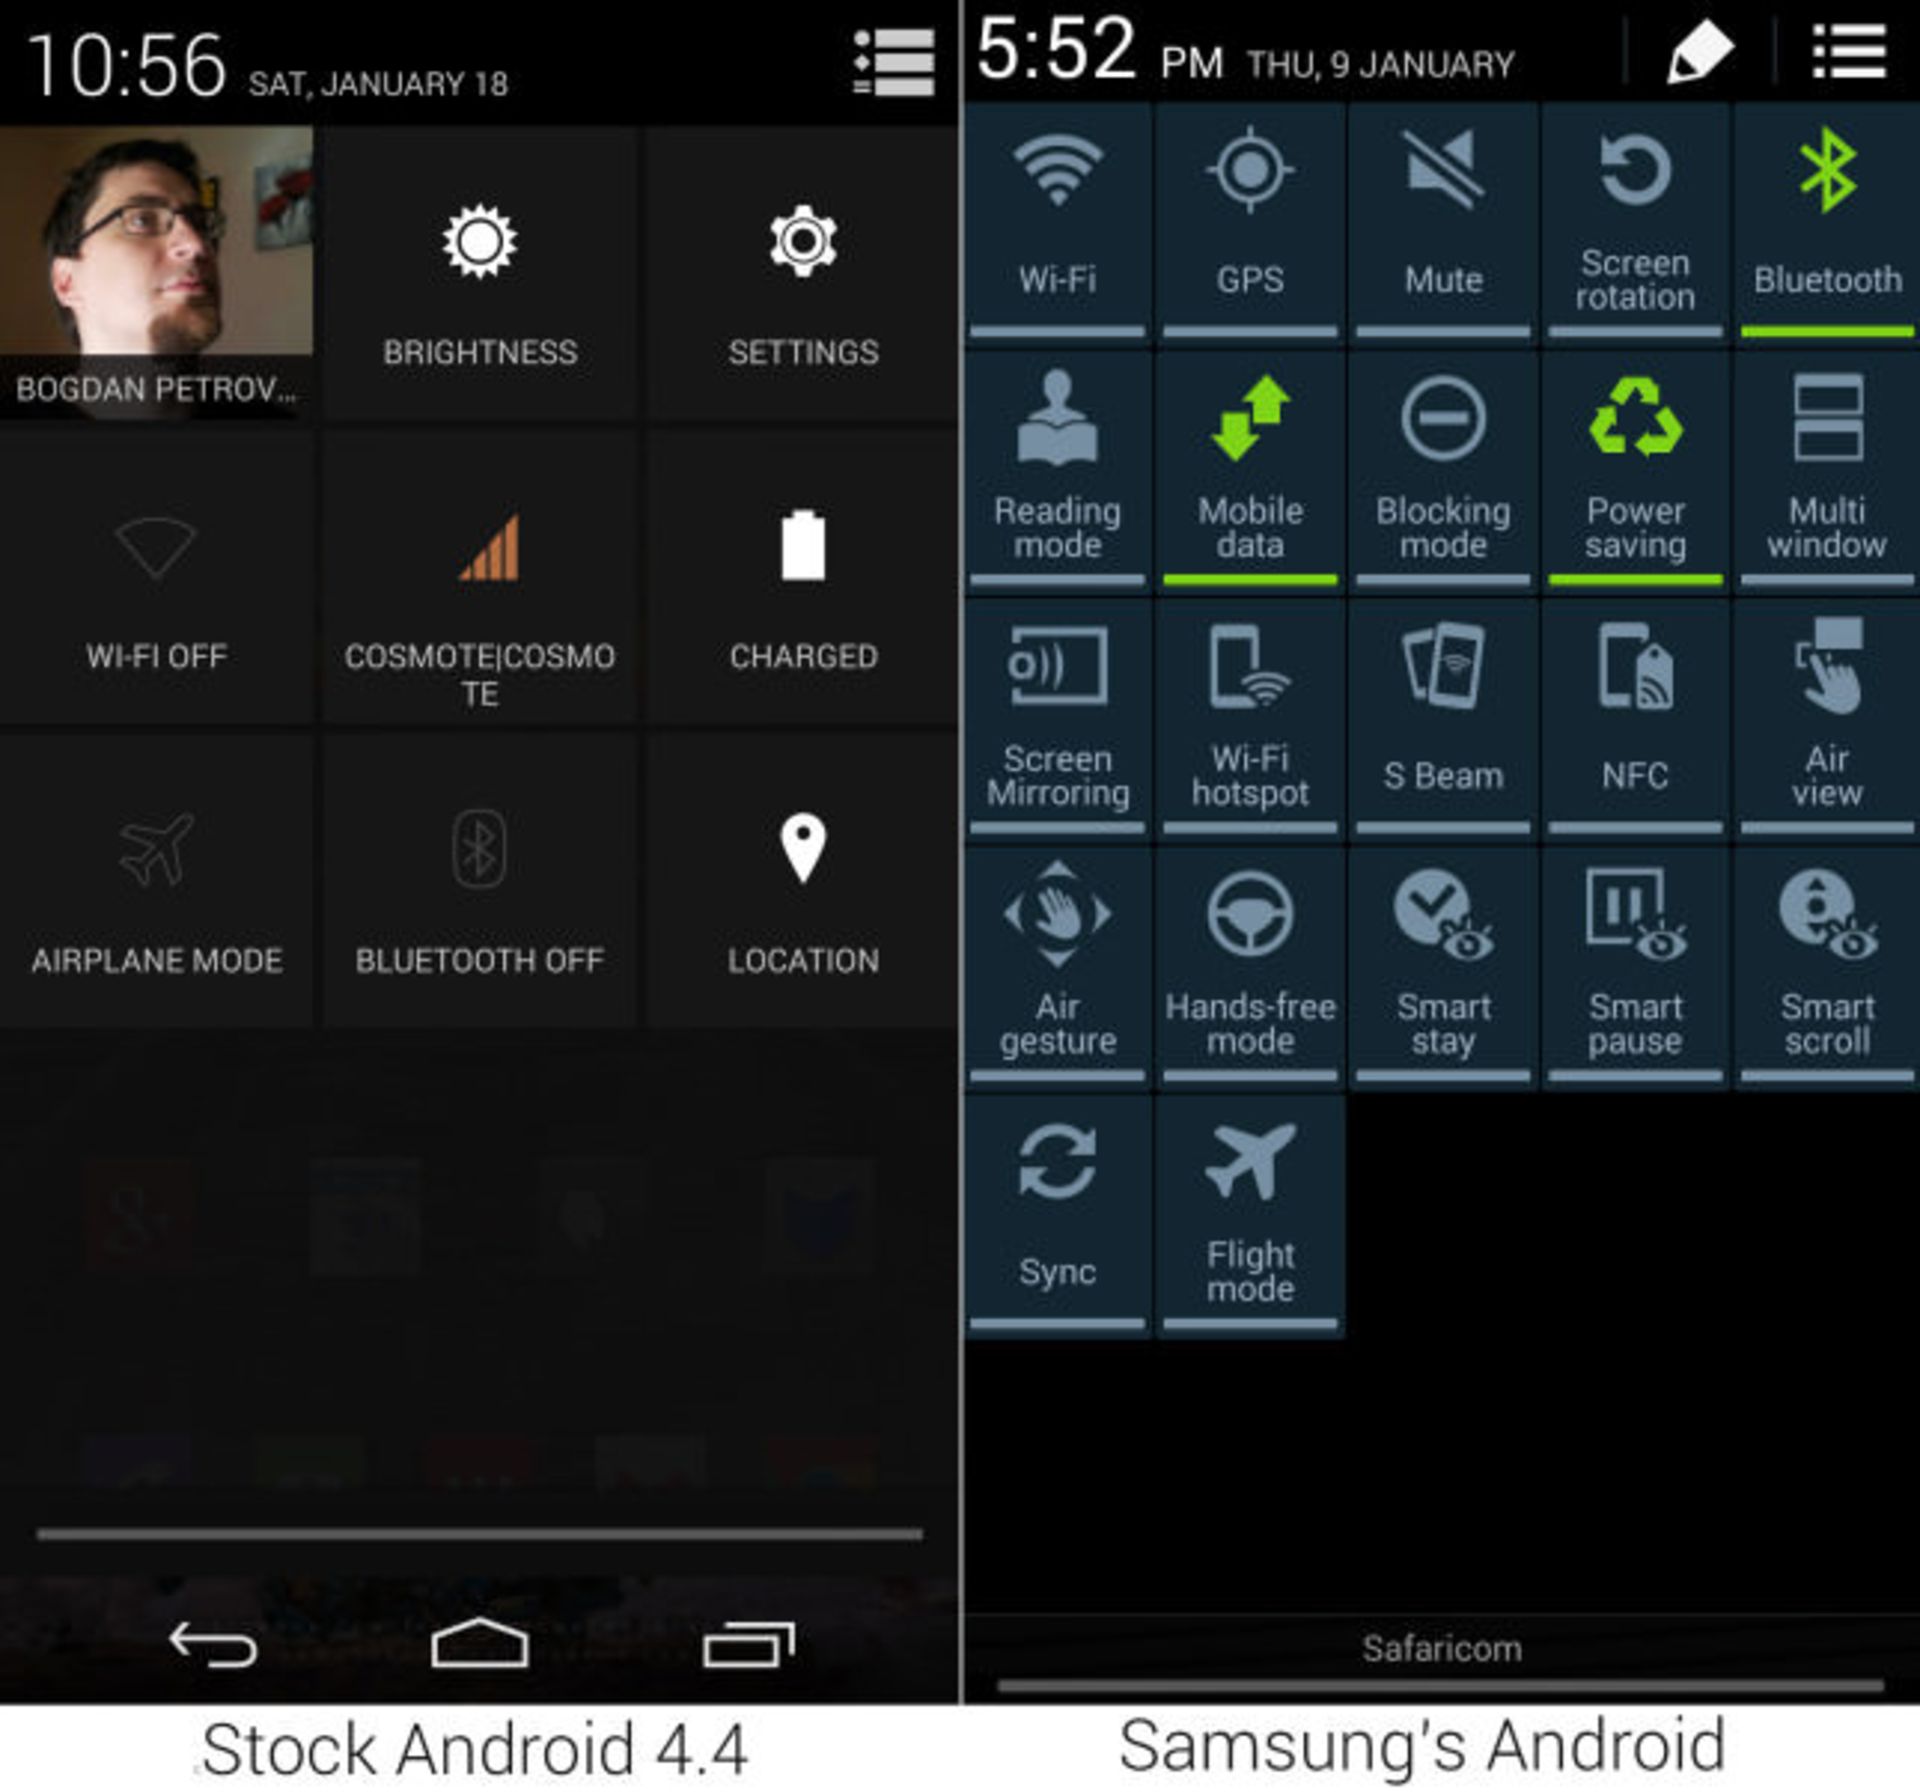 Stock-Android-4.4-vs-Samsung-Touchwiz-Galaxy-Note-3-DropDown-645x602